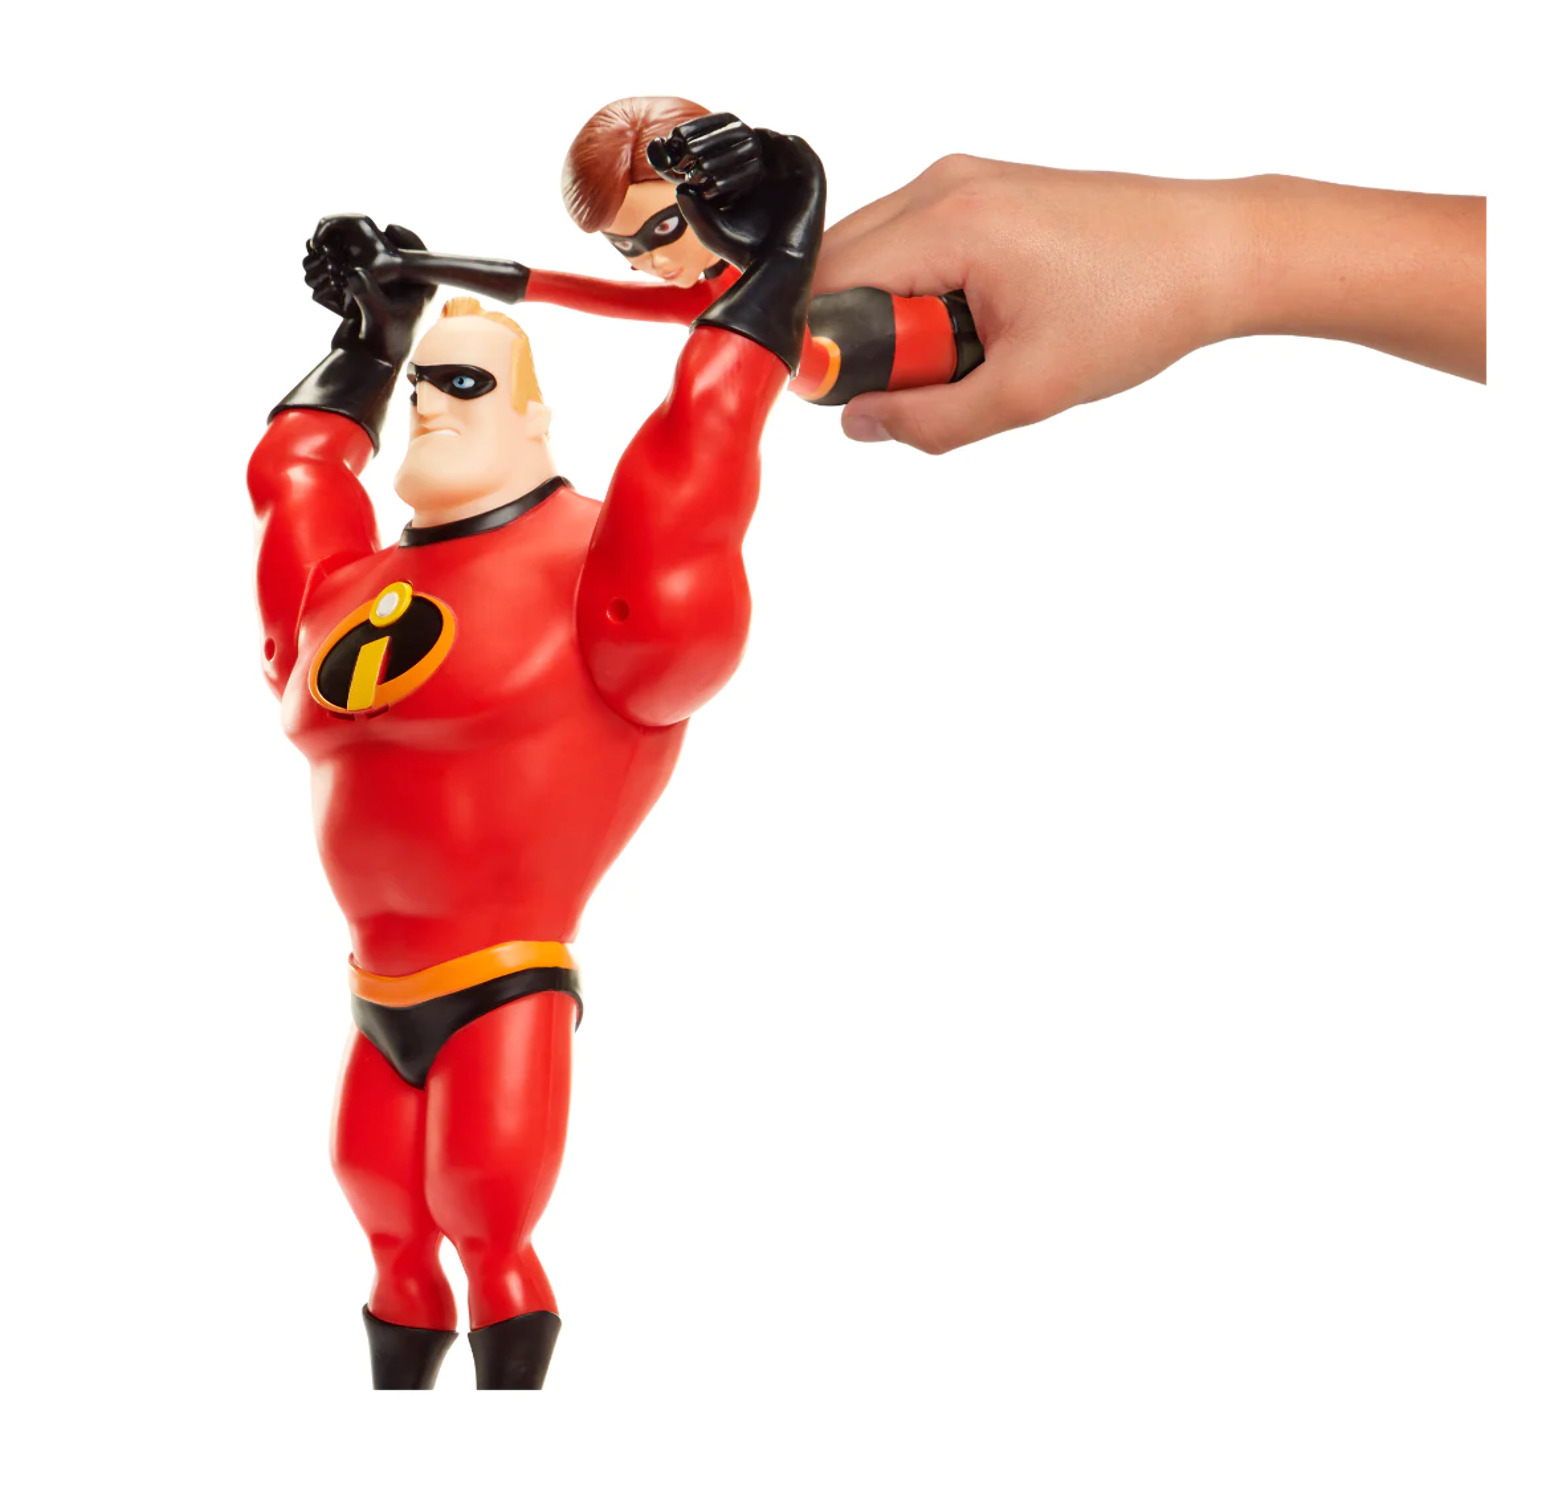 Incredibles 2 Power Couple Mr. Incredible and Elastigirl 12" Action Figures with Slingshot Feature - image 3 of 6